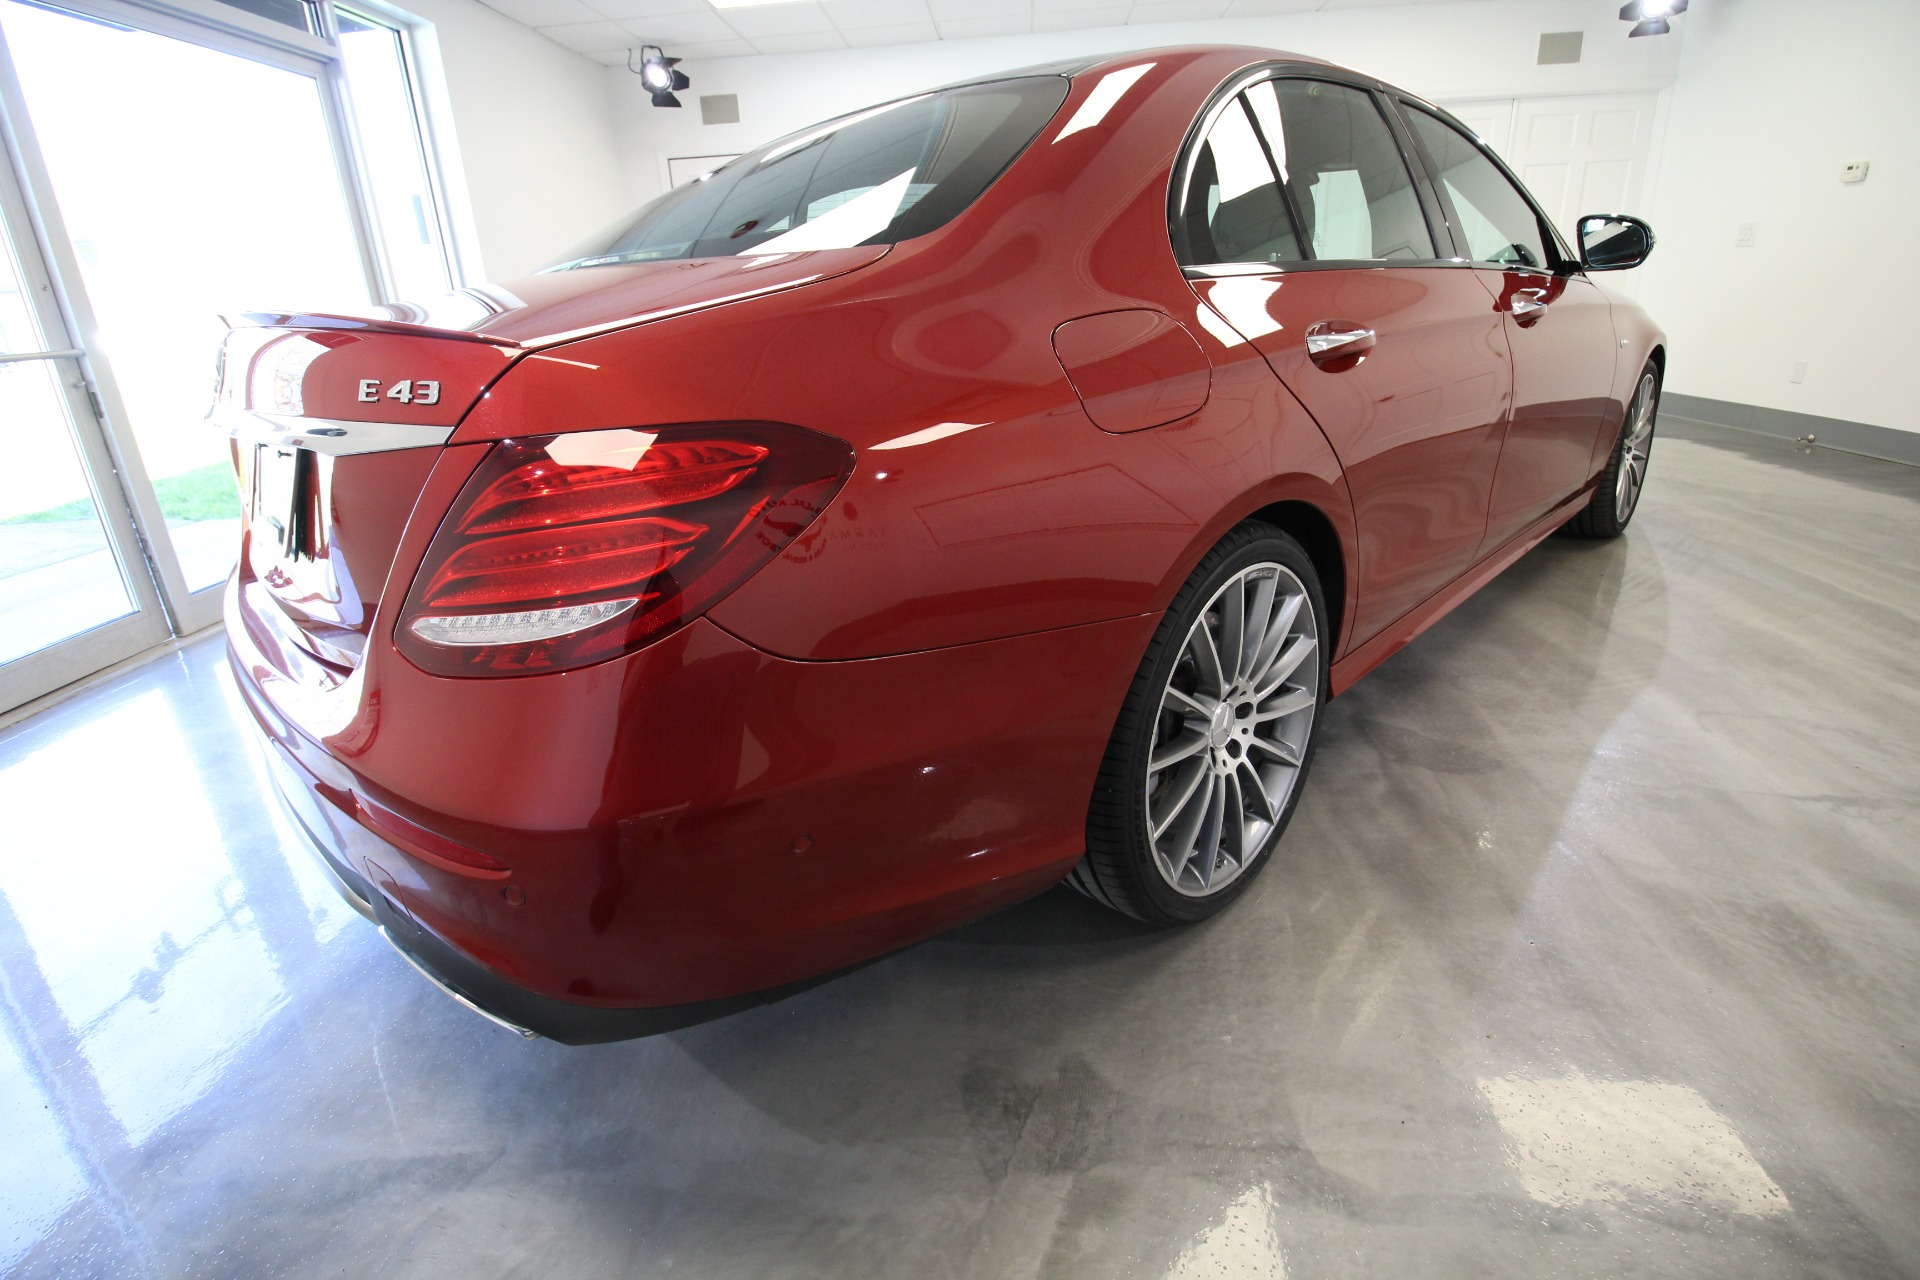 Used 2018 designo Cardinal Red Metallic Mercedes-Benz E-Class AMG E 43 4MATIC RARE COLOR COMBO LIKE NEW LOW MILES | Albany, NY